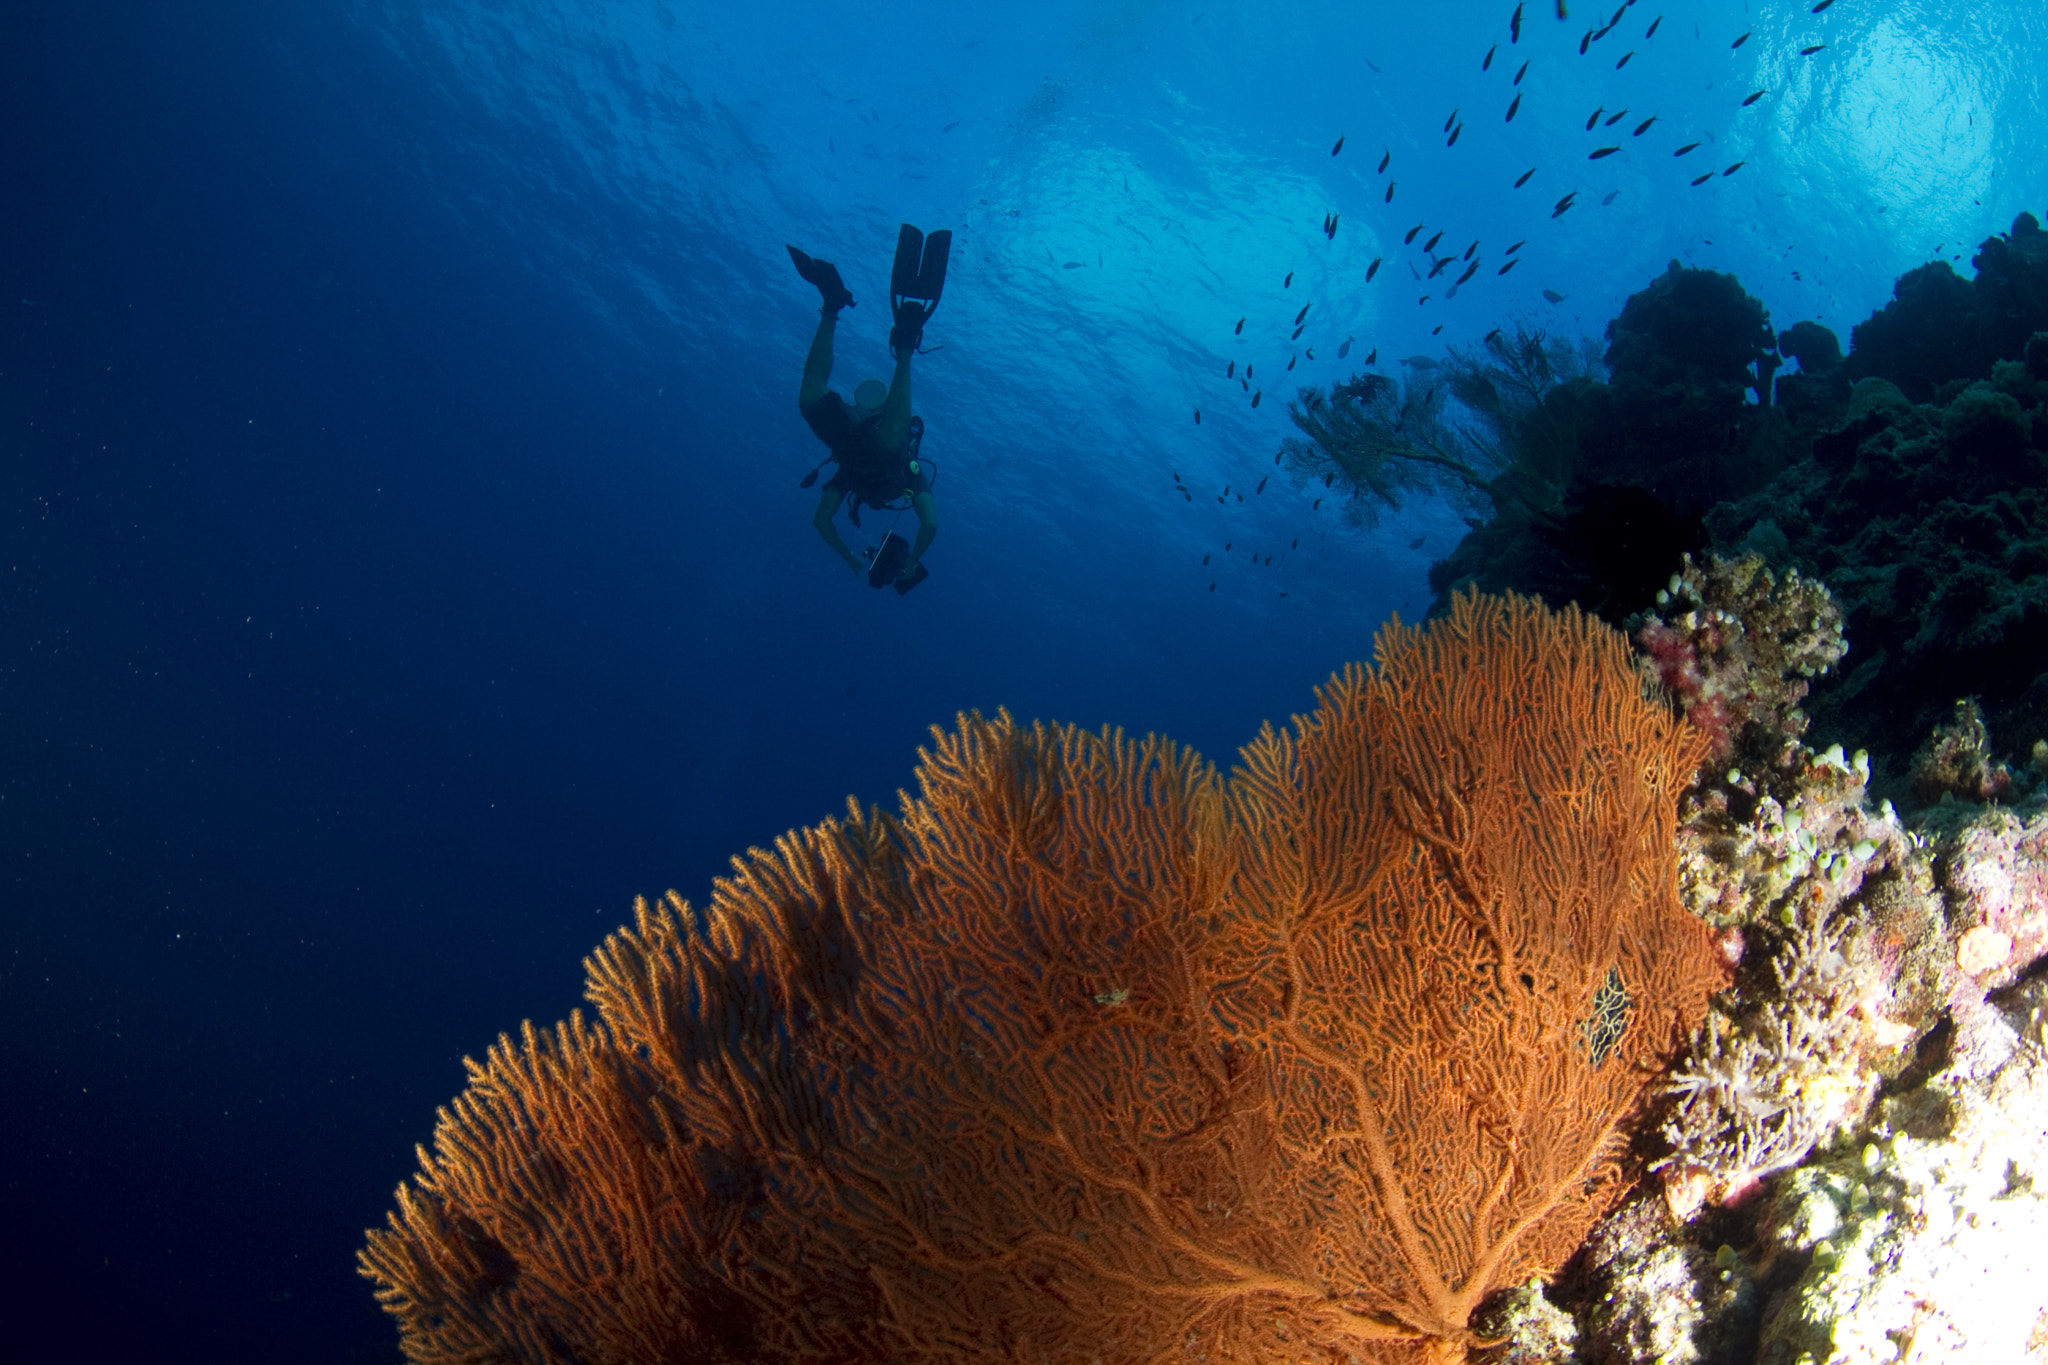 Tokina AT-X 10-17mm F3.5-4.5 DX Fisheye sample photo. Diver with camera swimming above large sea fan photography